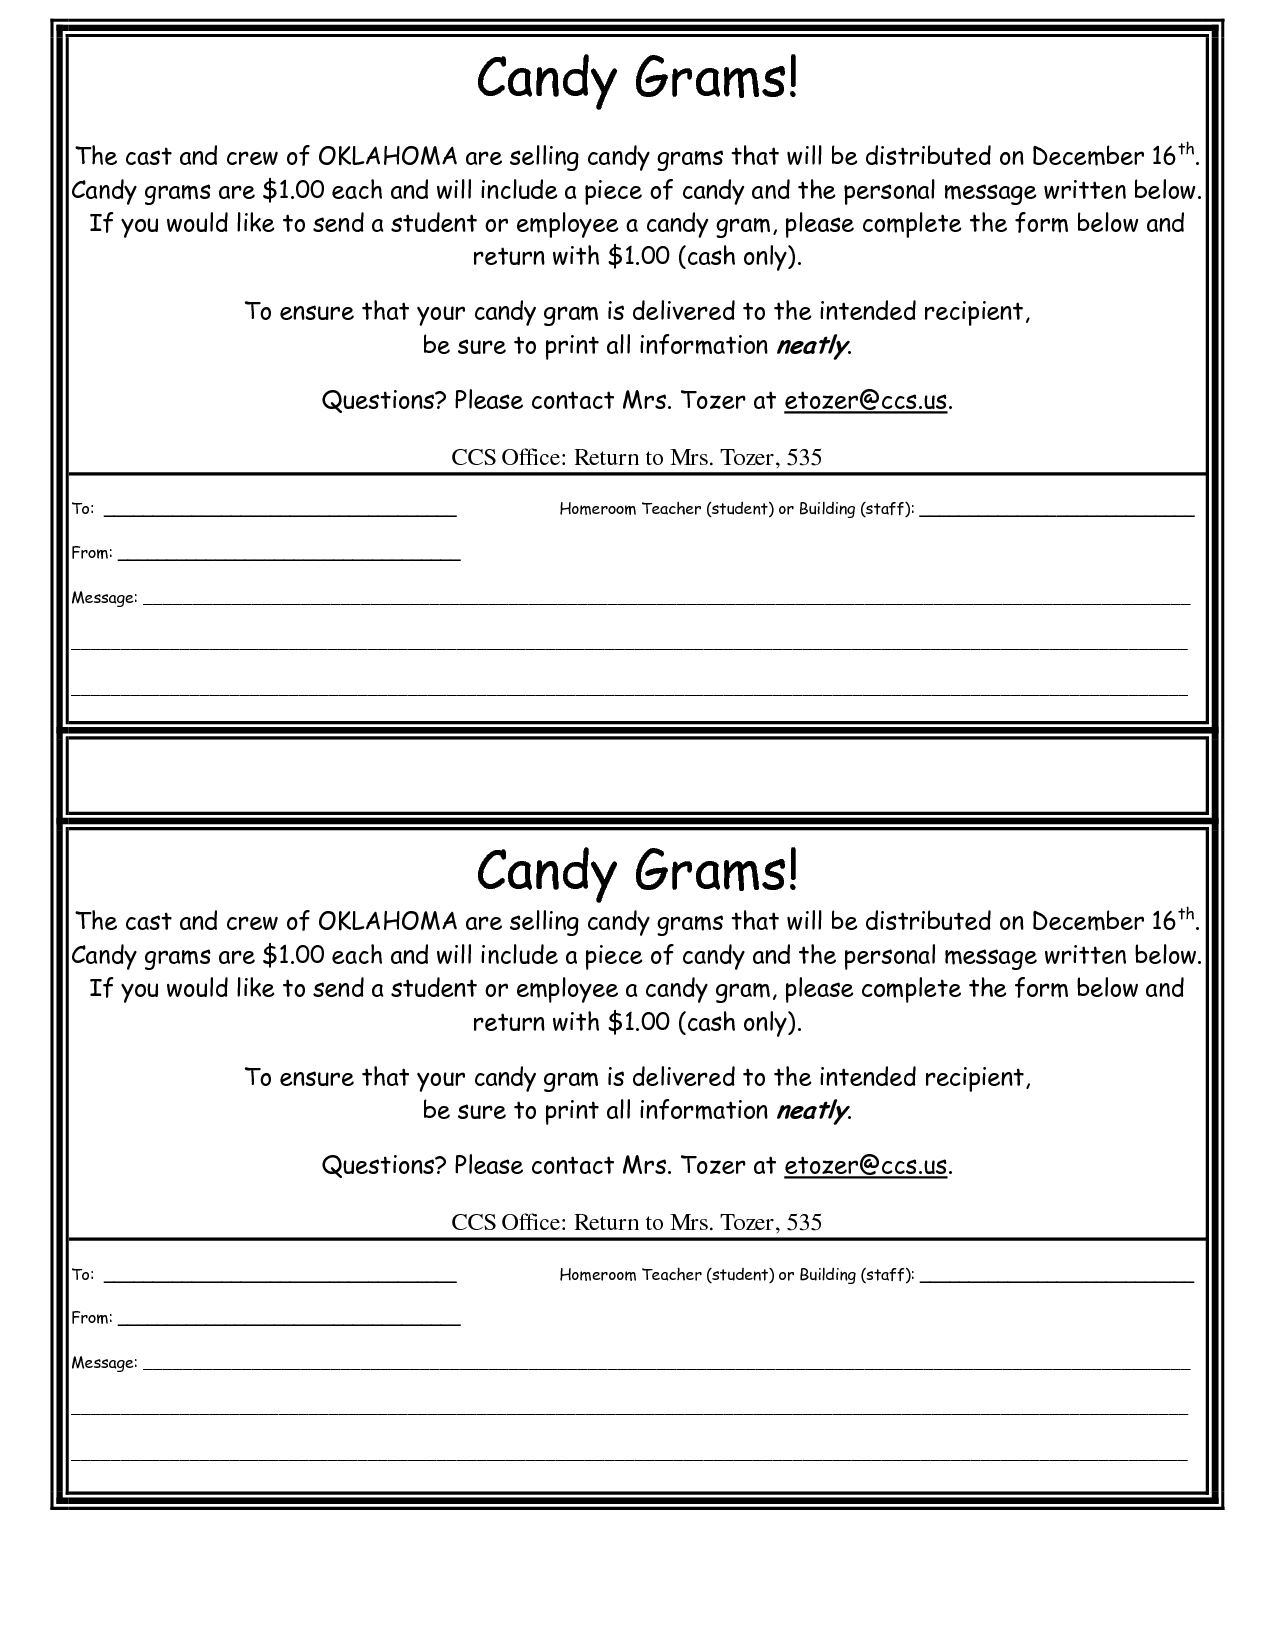 8 Best Images Of Printable Candy Cane Gram Templates Candy Cane Gram Sayings Printable Candy